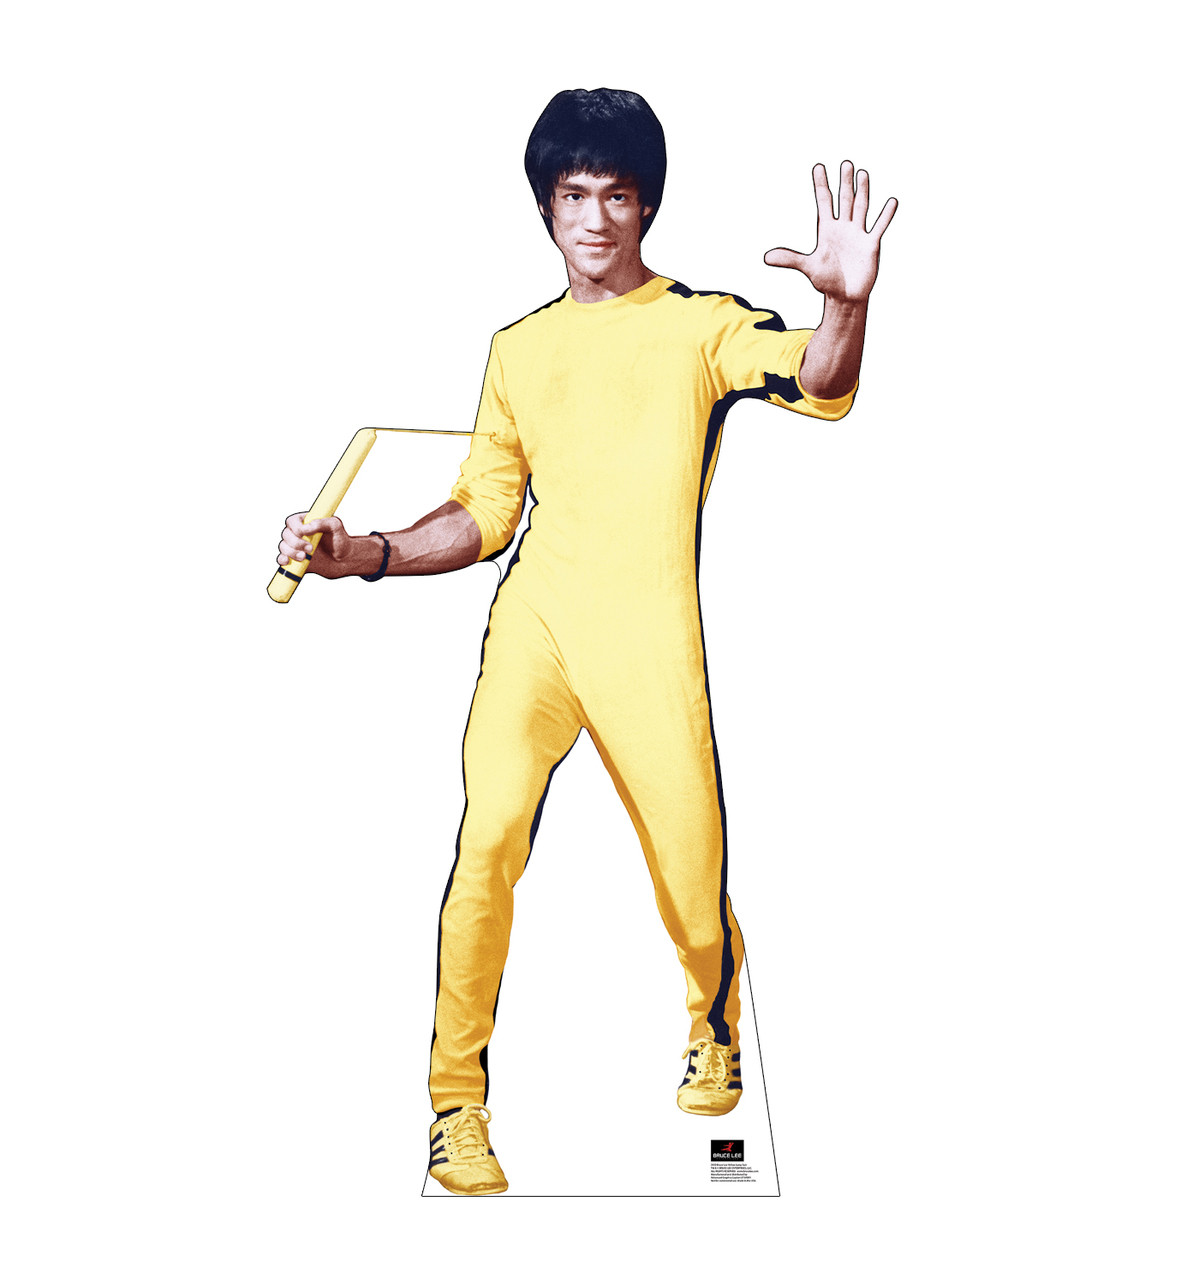 Life-size Bruce Lee cardboard standee front view.